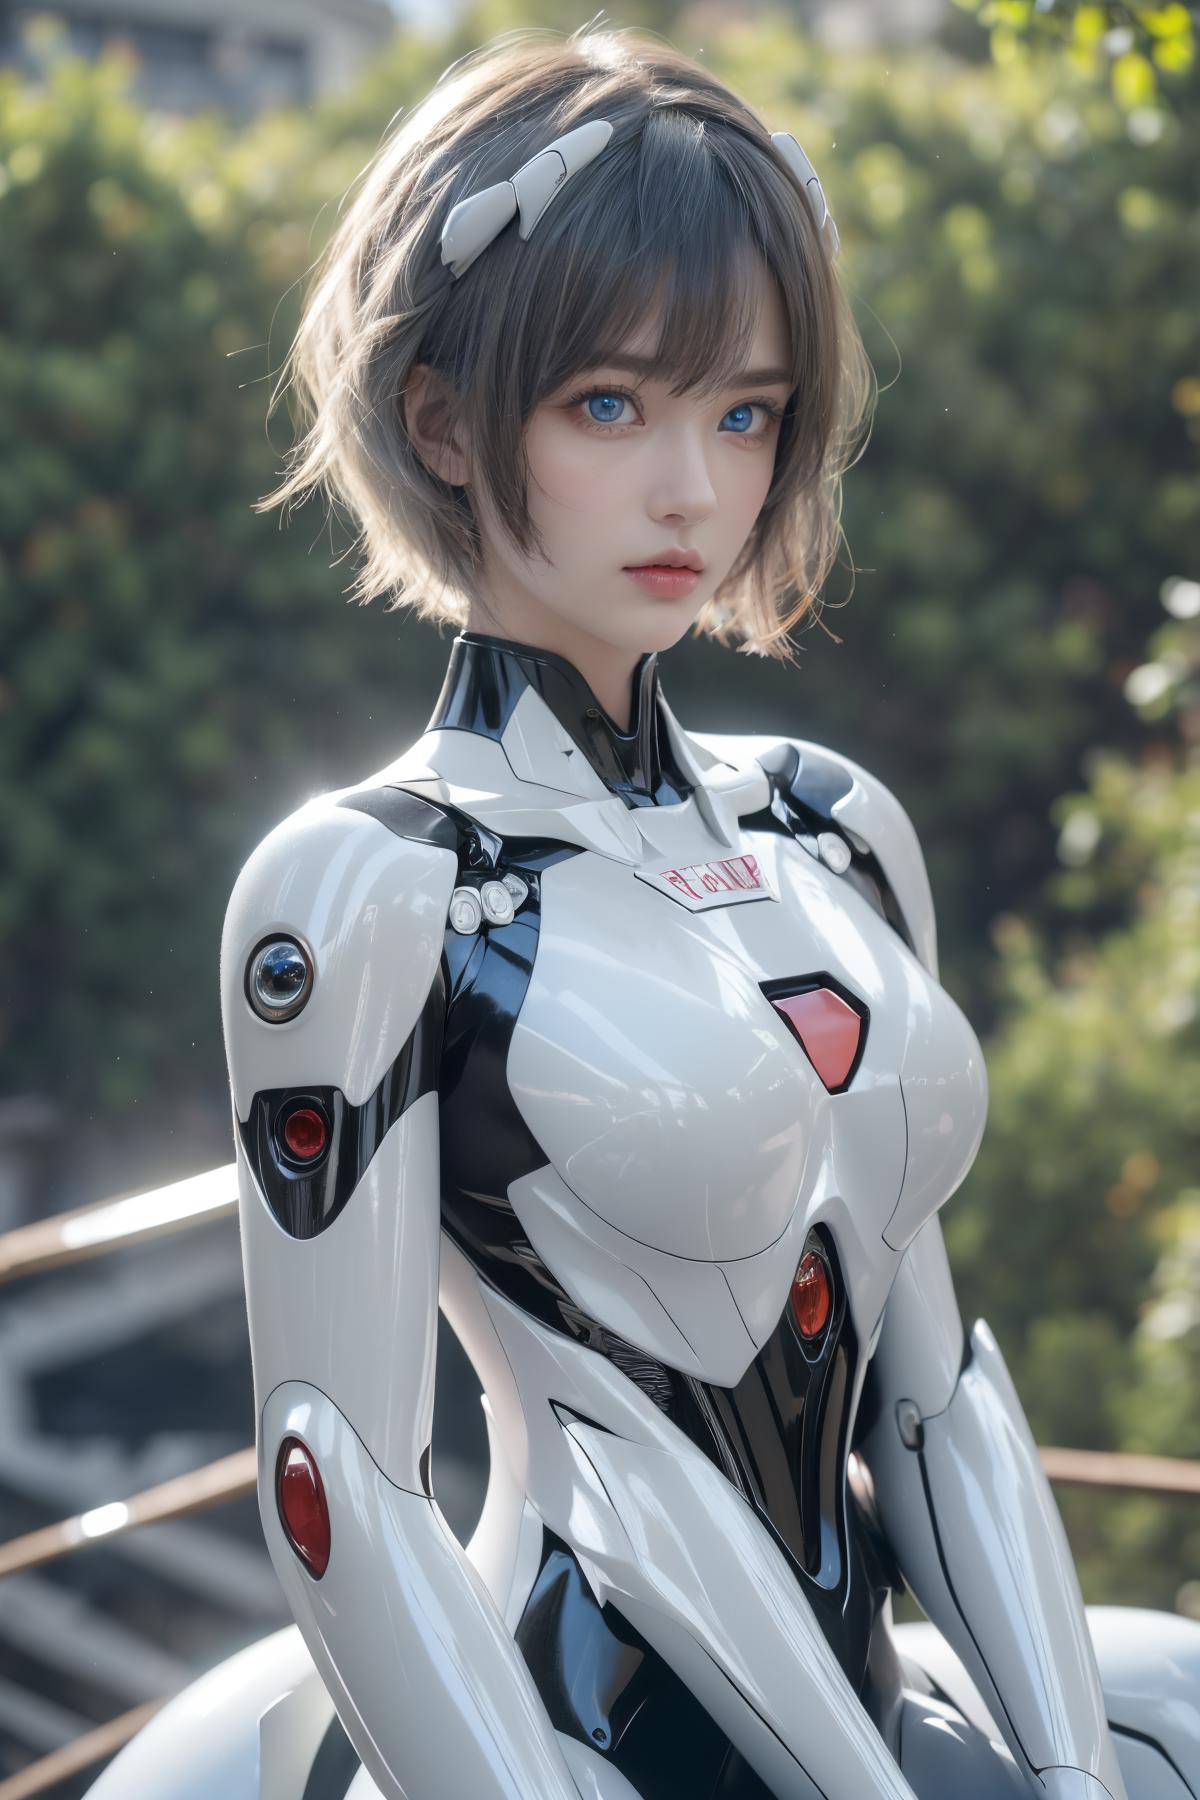 AI model image by marshall424